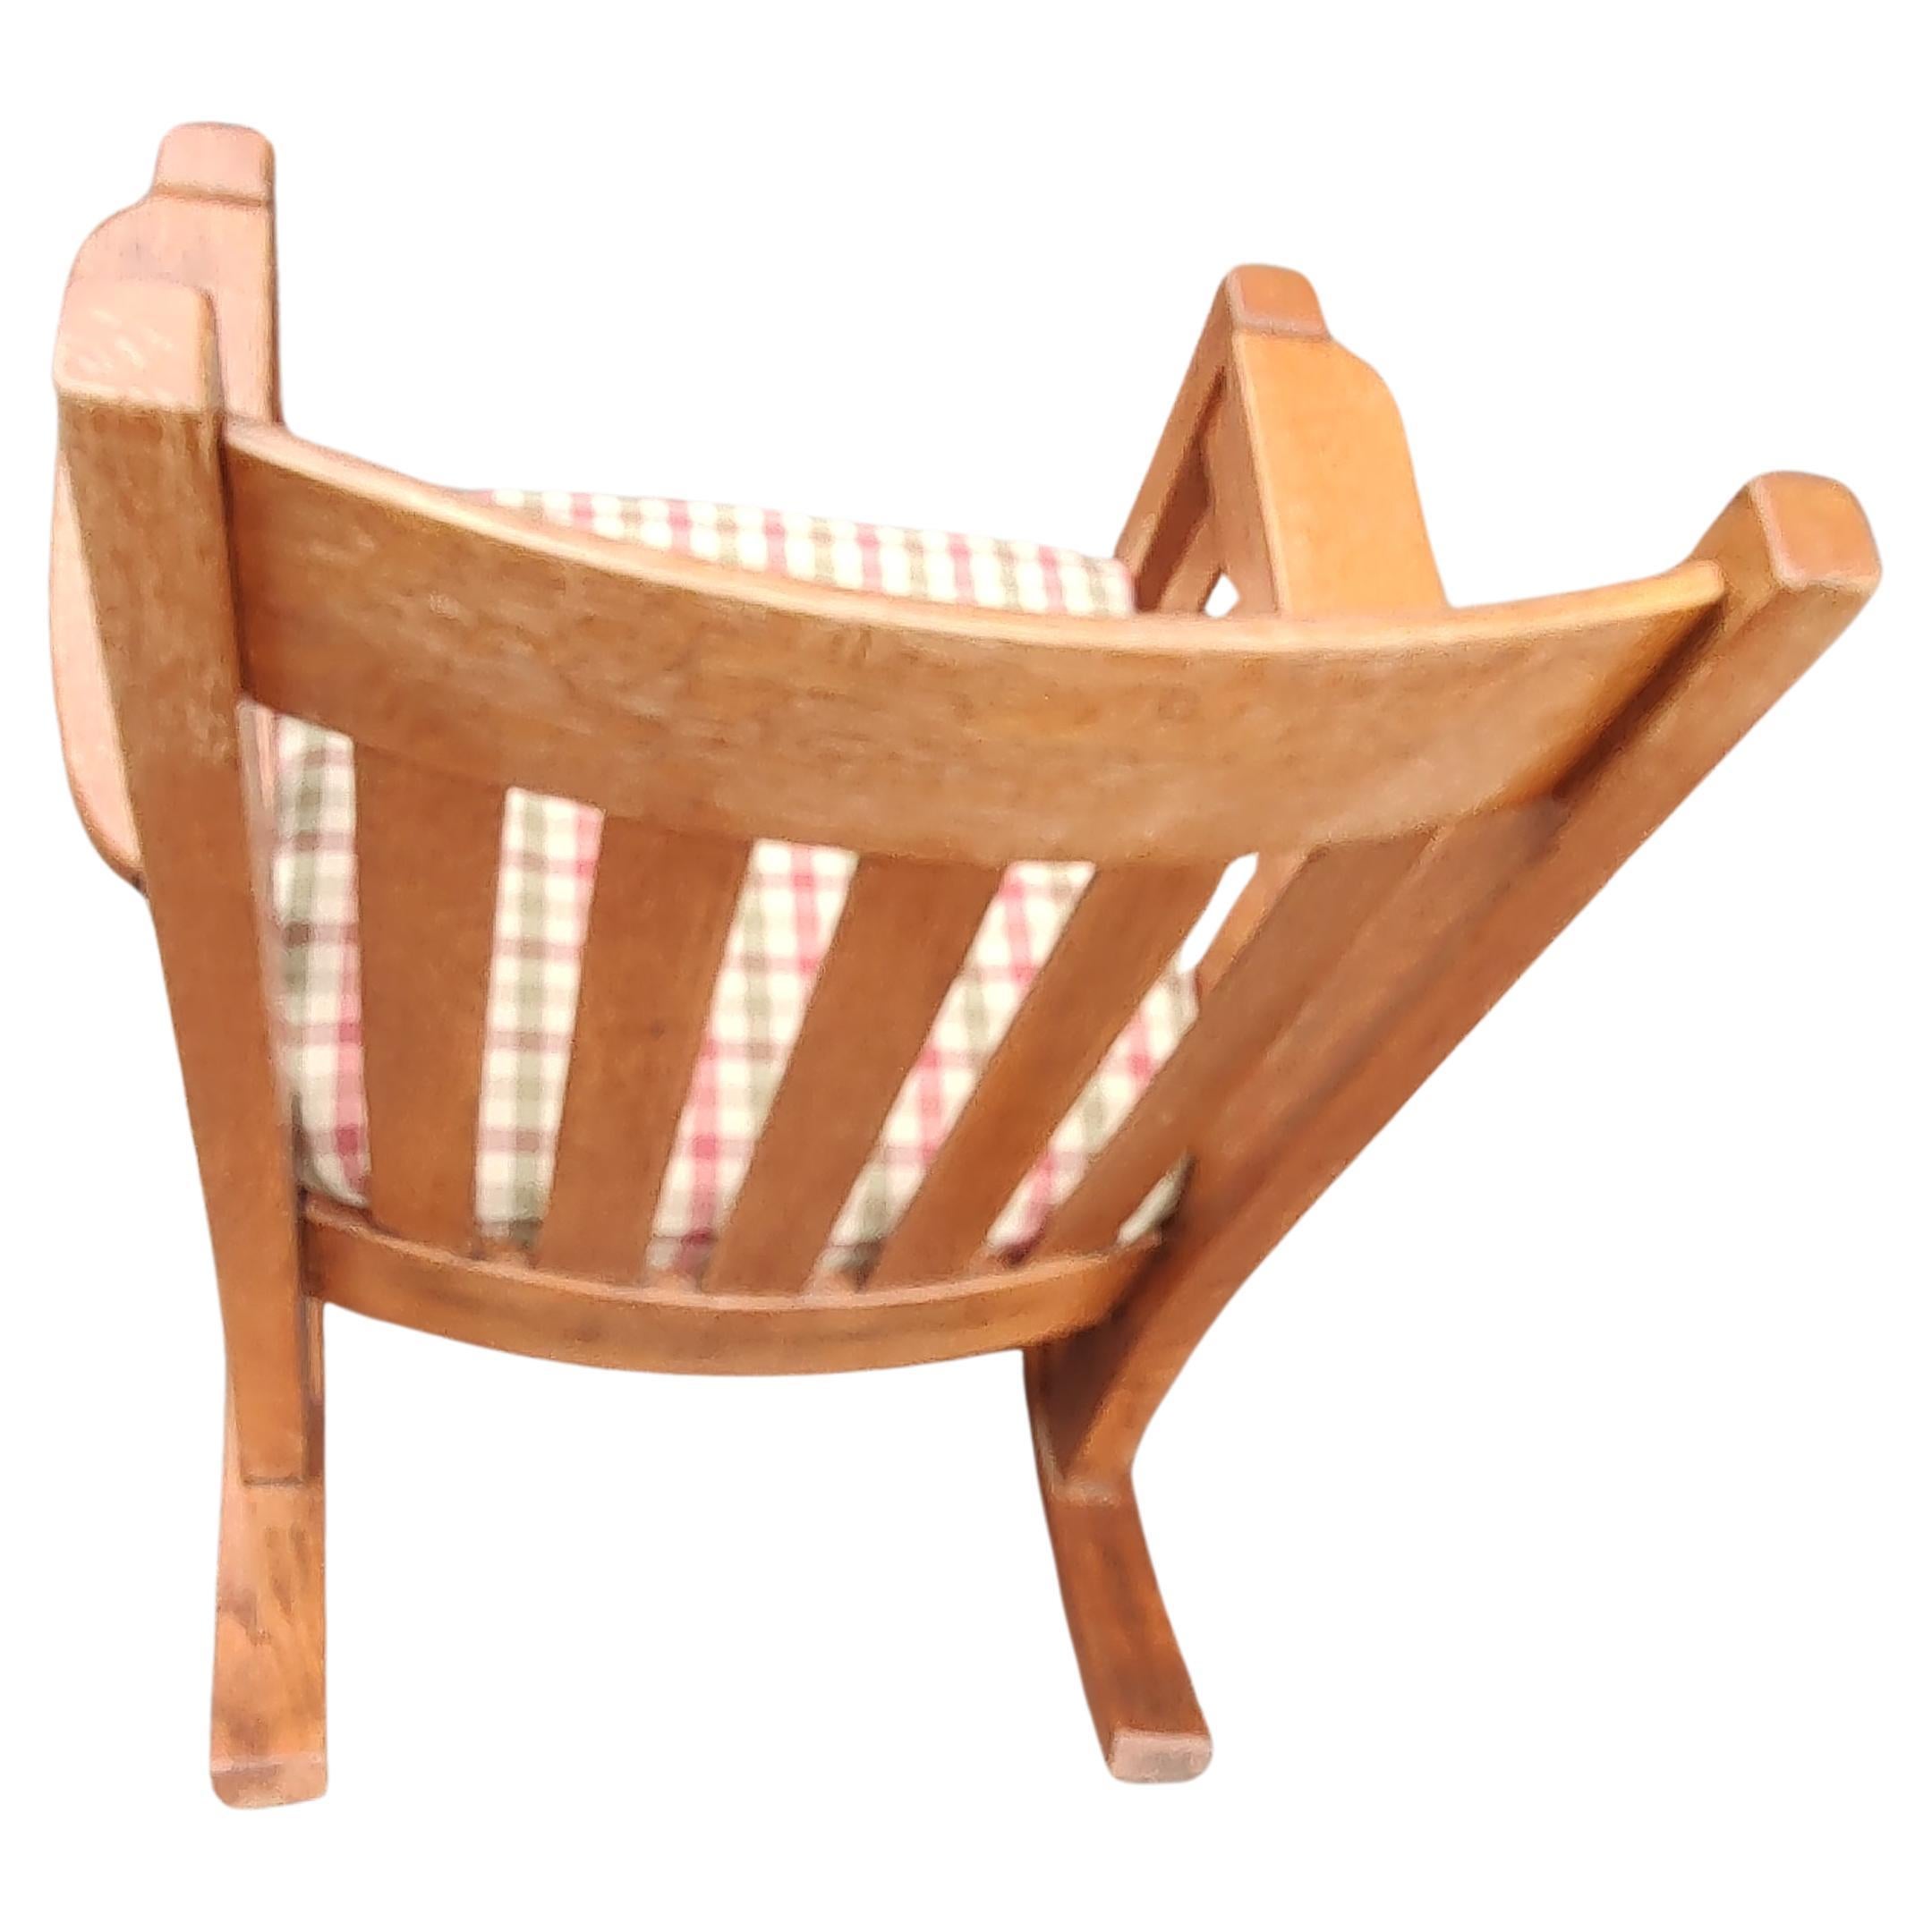 Joinery Arts & Crafts Mission Oak Slatted Rocking Chair by Harden C1910 For Sale